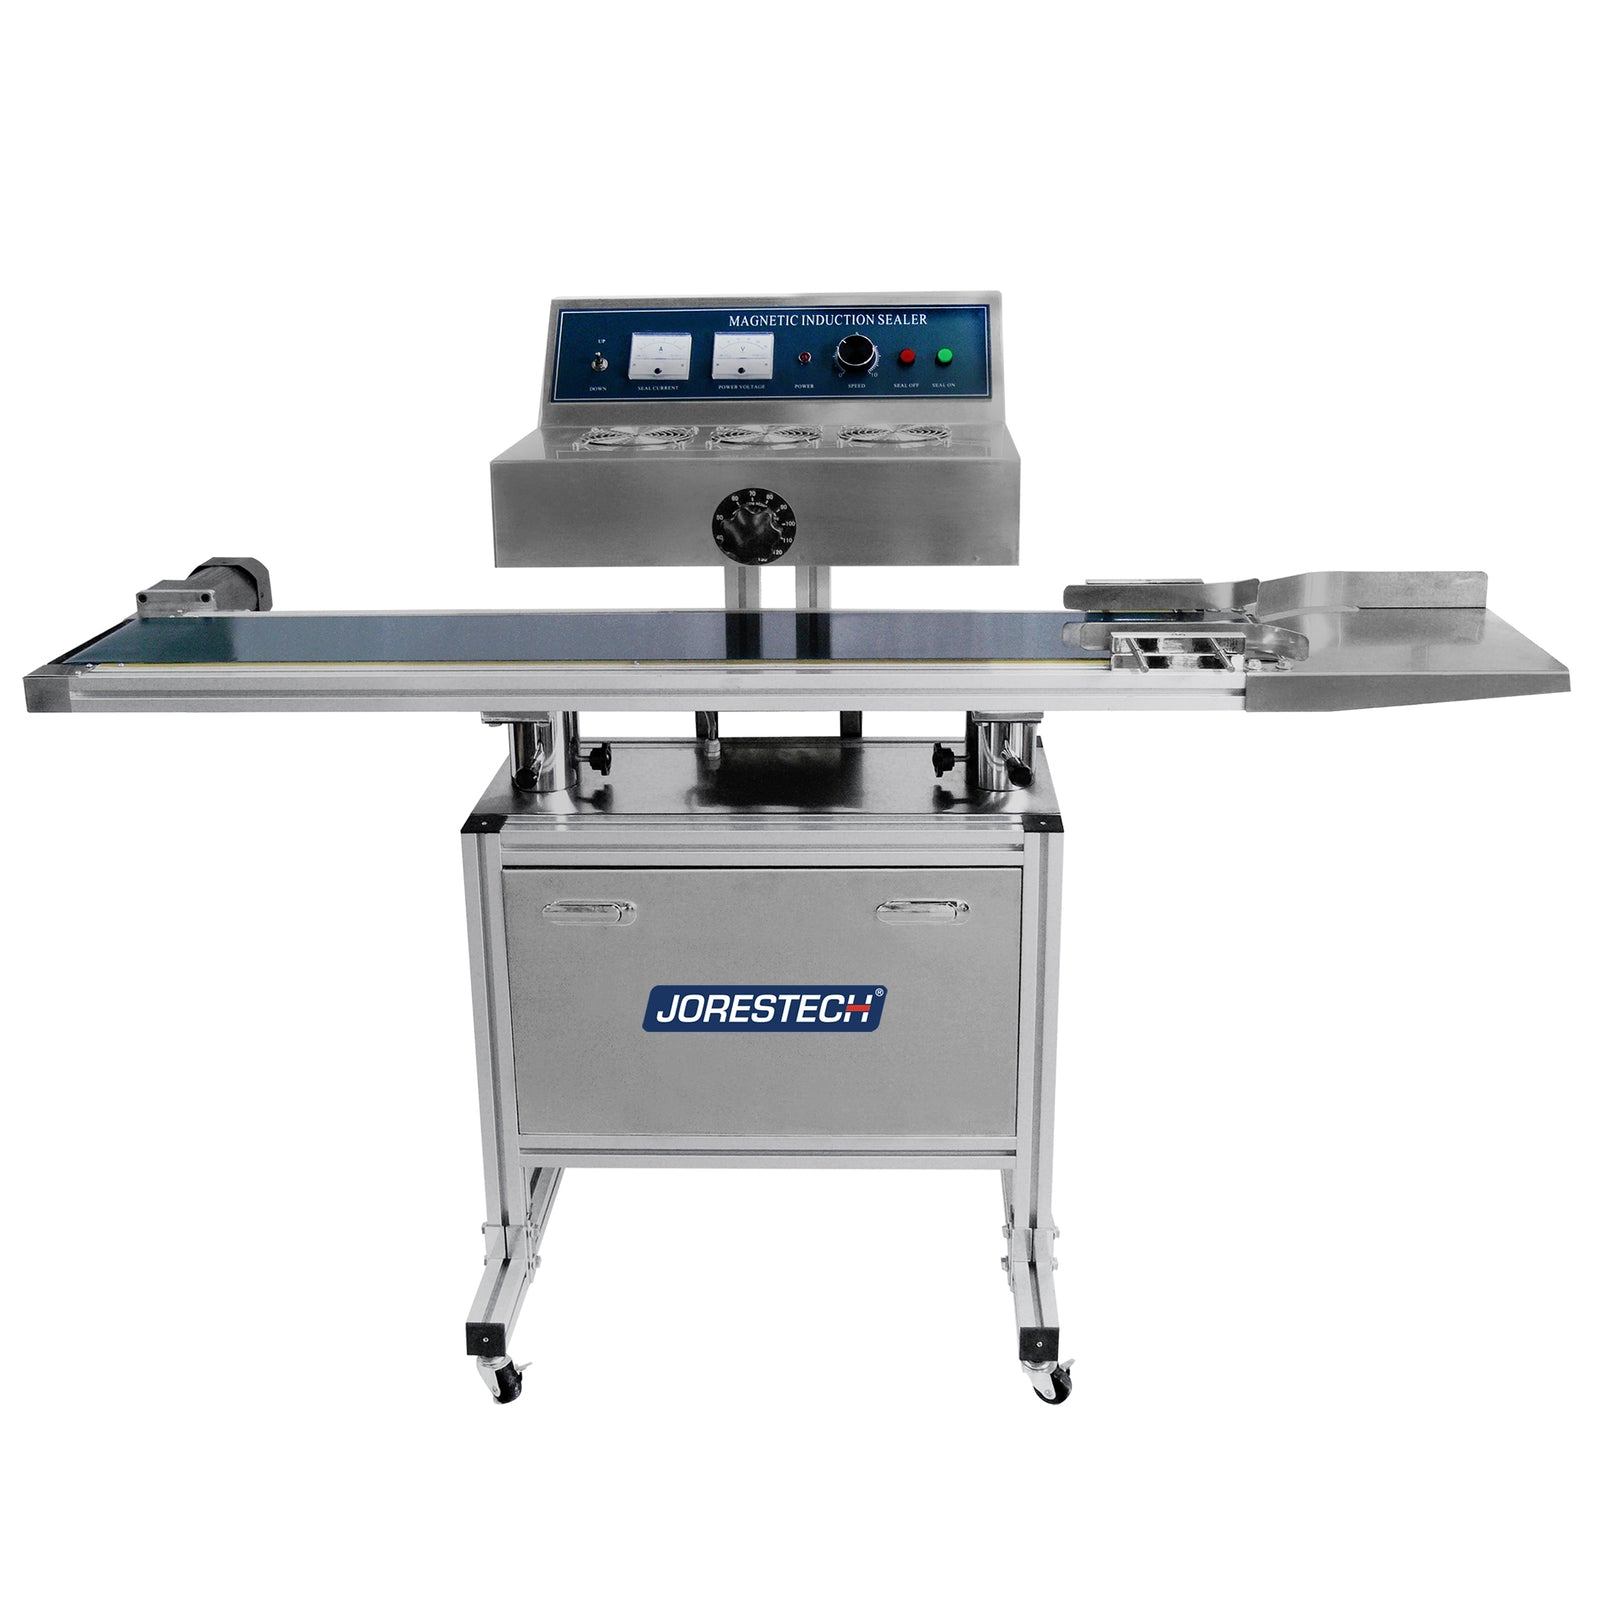 Self standing continuous induction cap sealer with conveyor